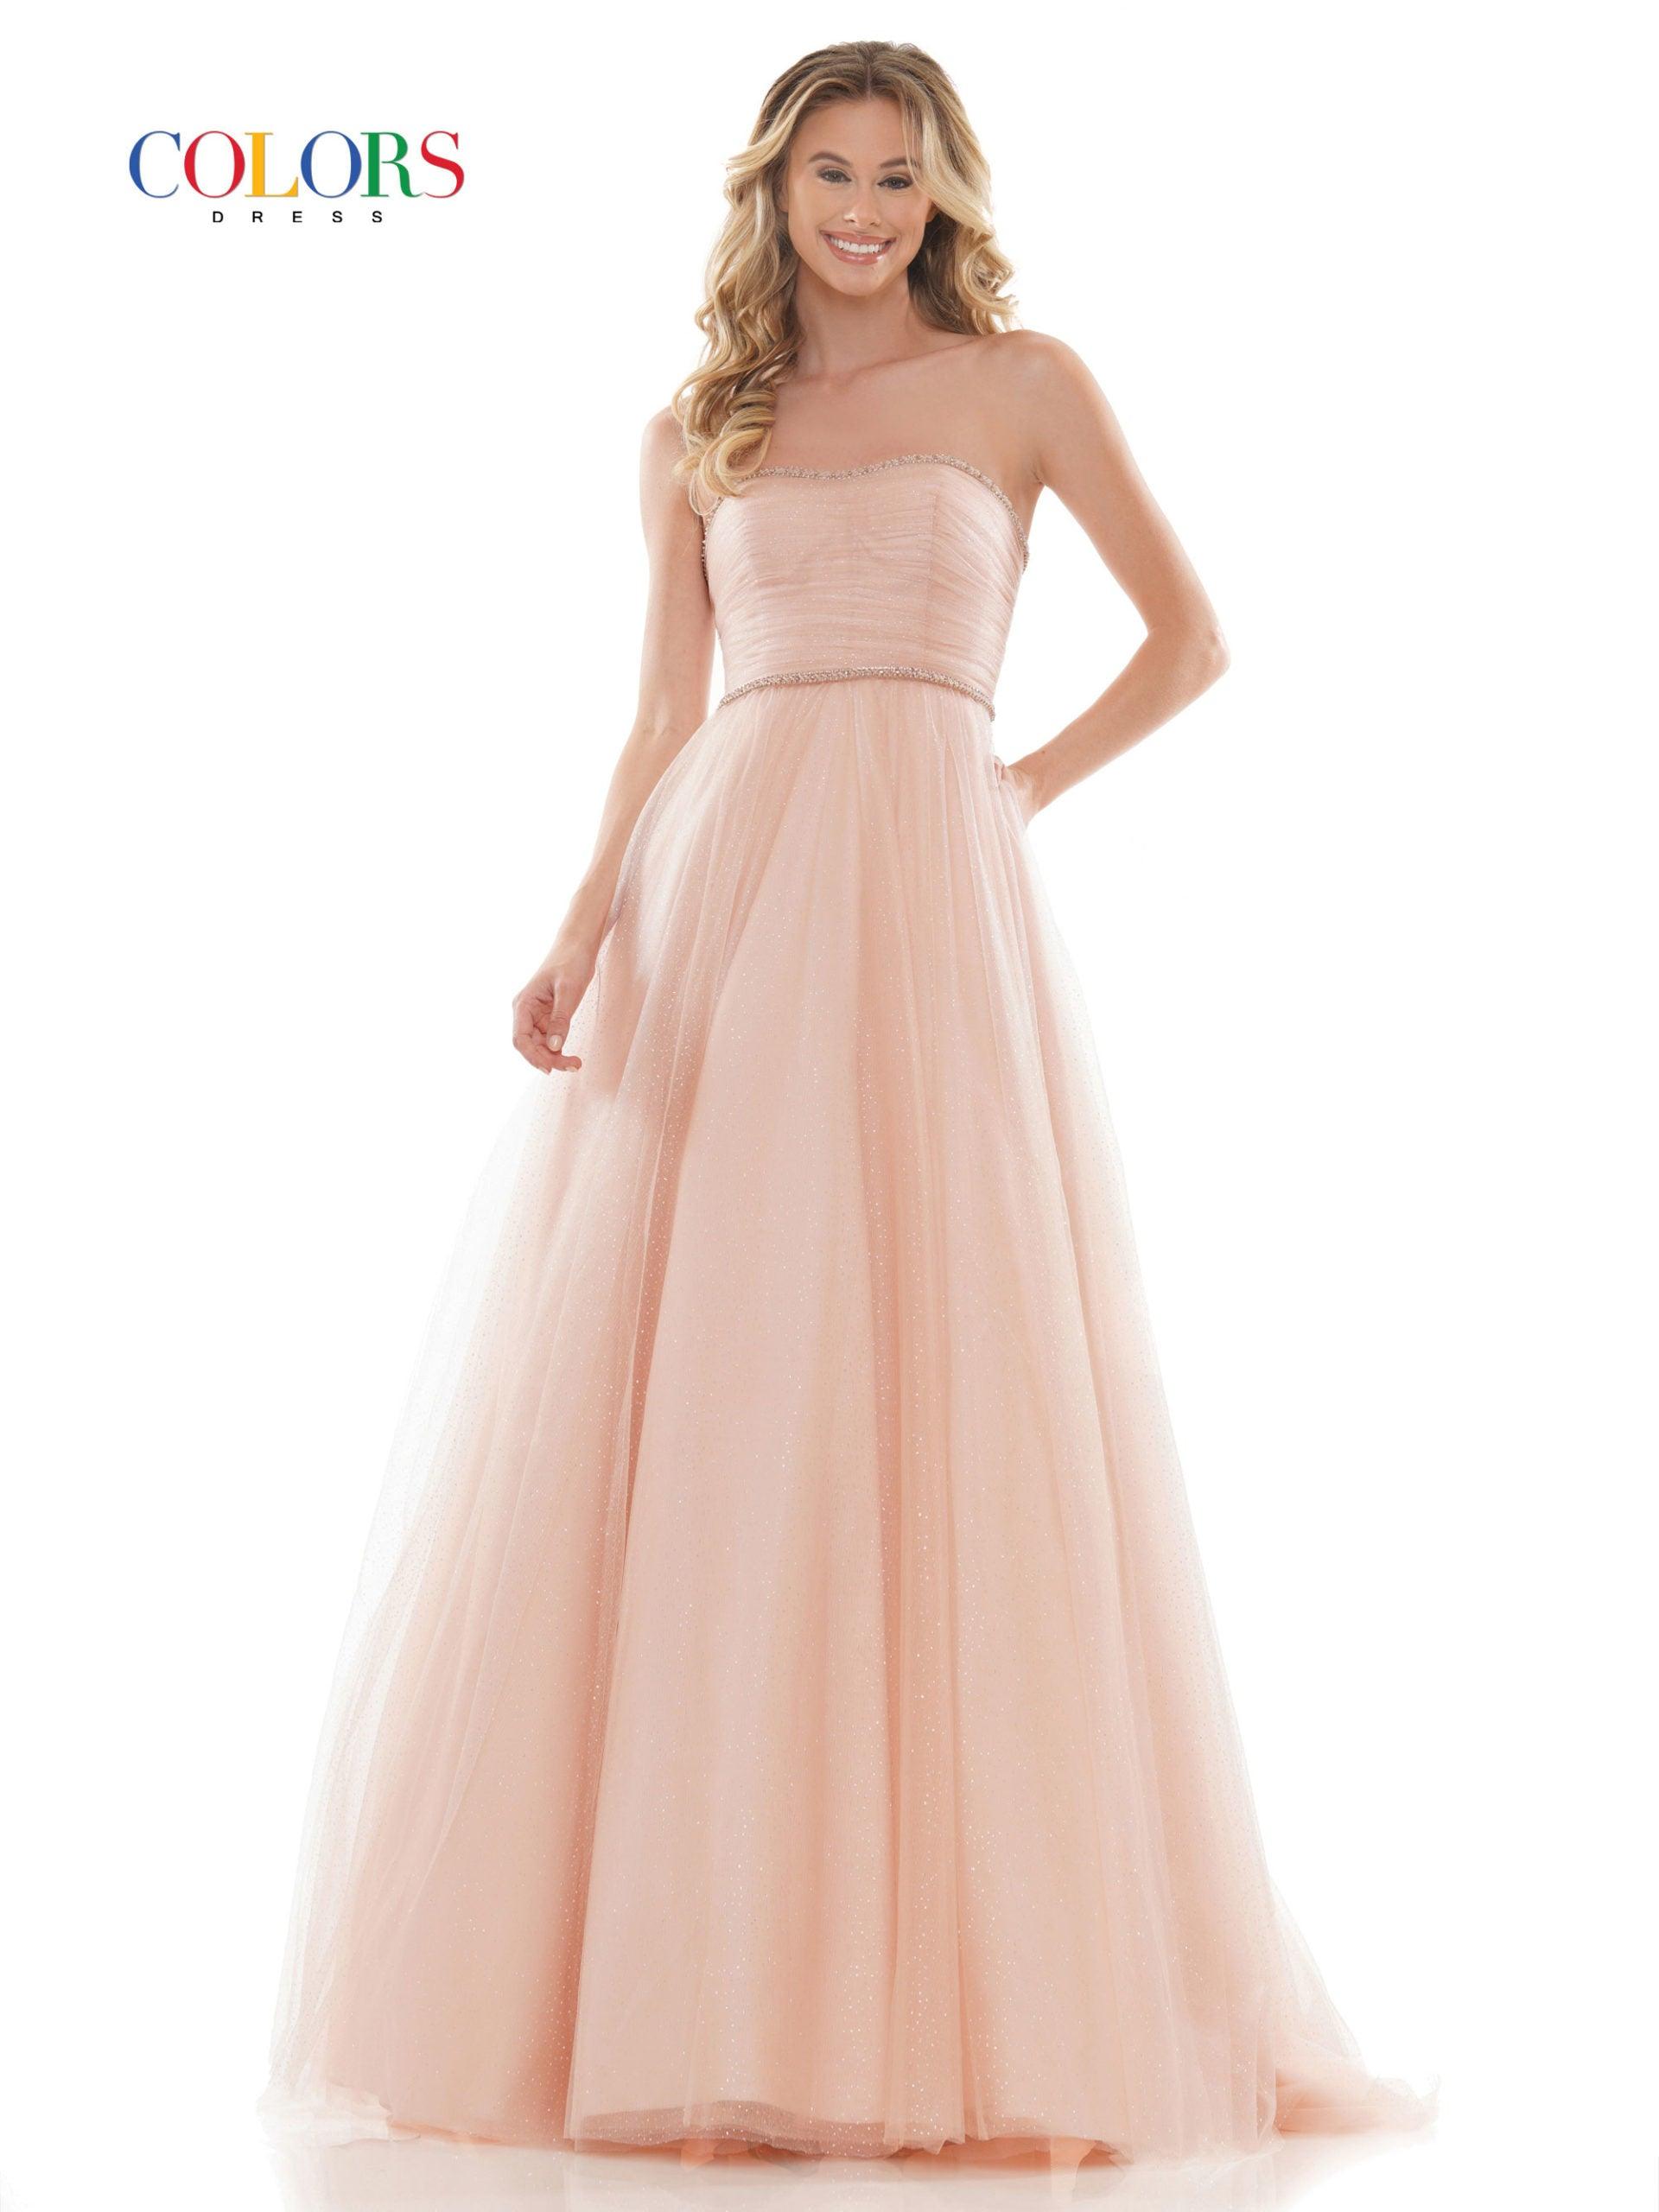 Colors Long Formal Strapless Prom Ball Gown 2703 - The Dress Outlet